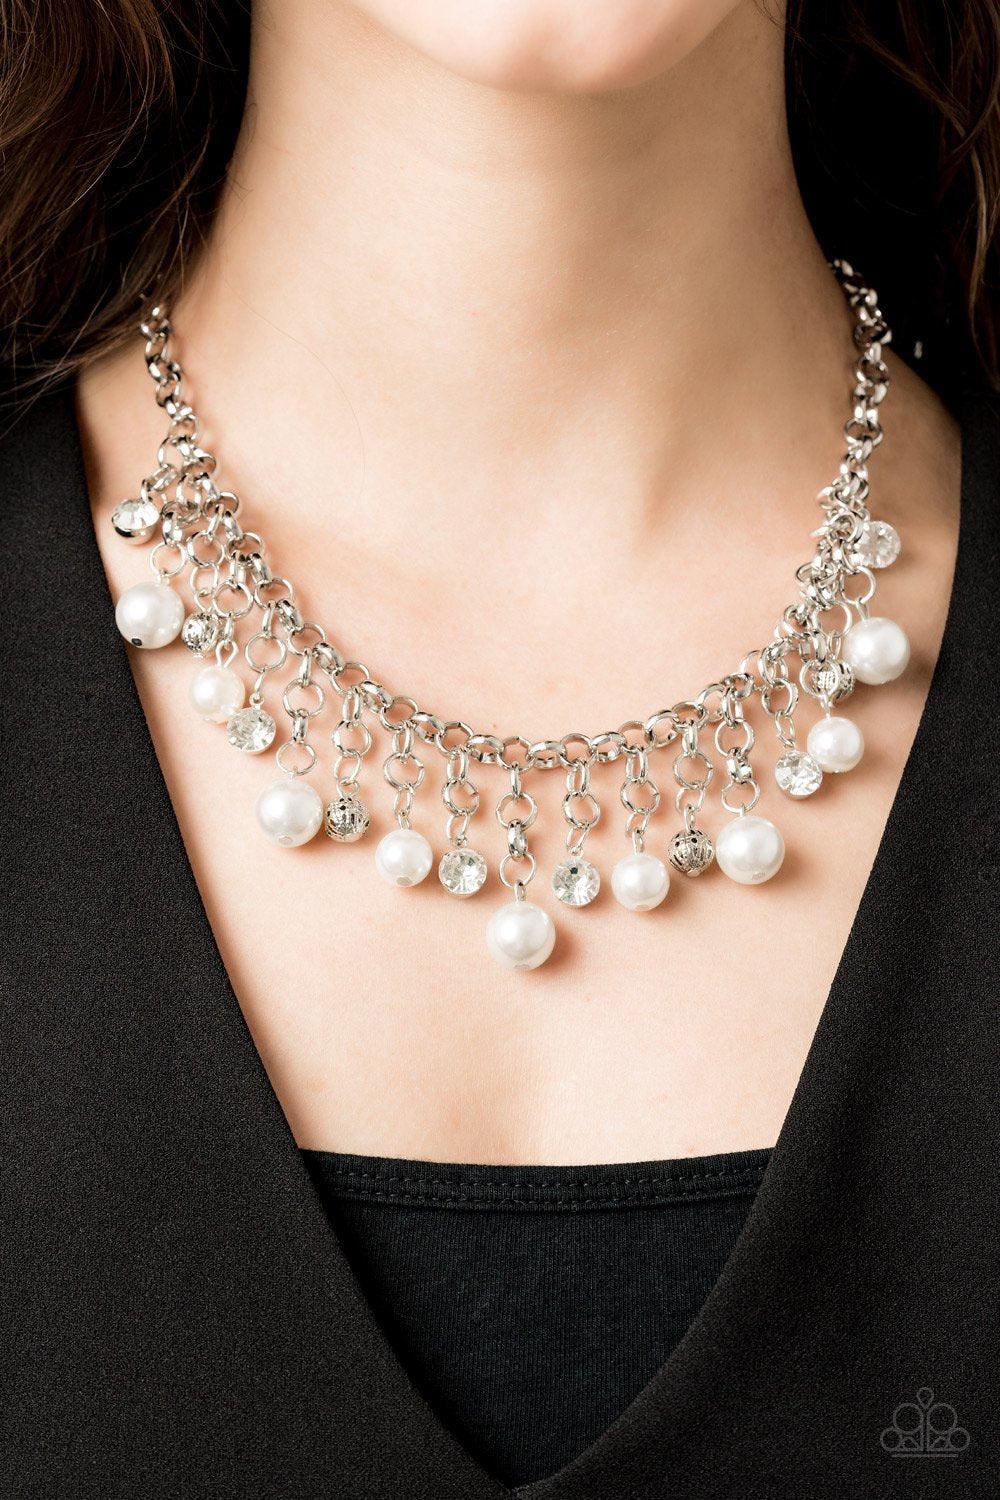 Heir-Headed Silver and White Rhinestone and Pearl Necklace - Paparazzi Accessories-CarasShop.com - $5 Jewelry by Cara Jewels